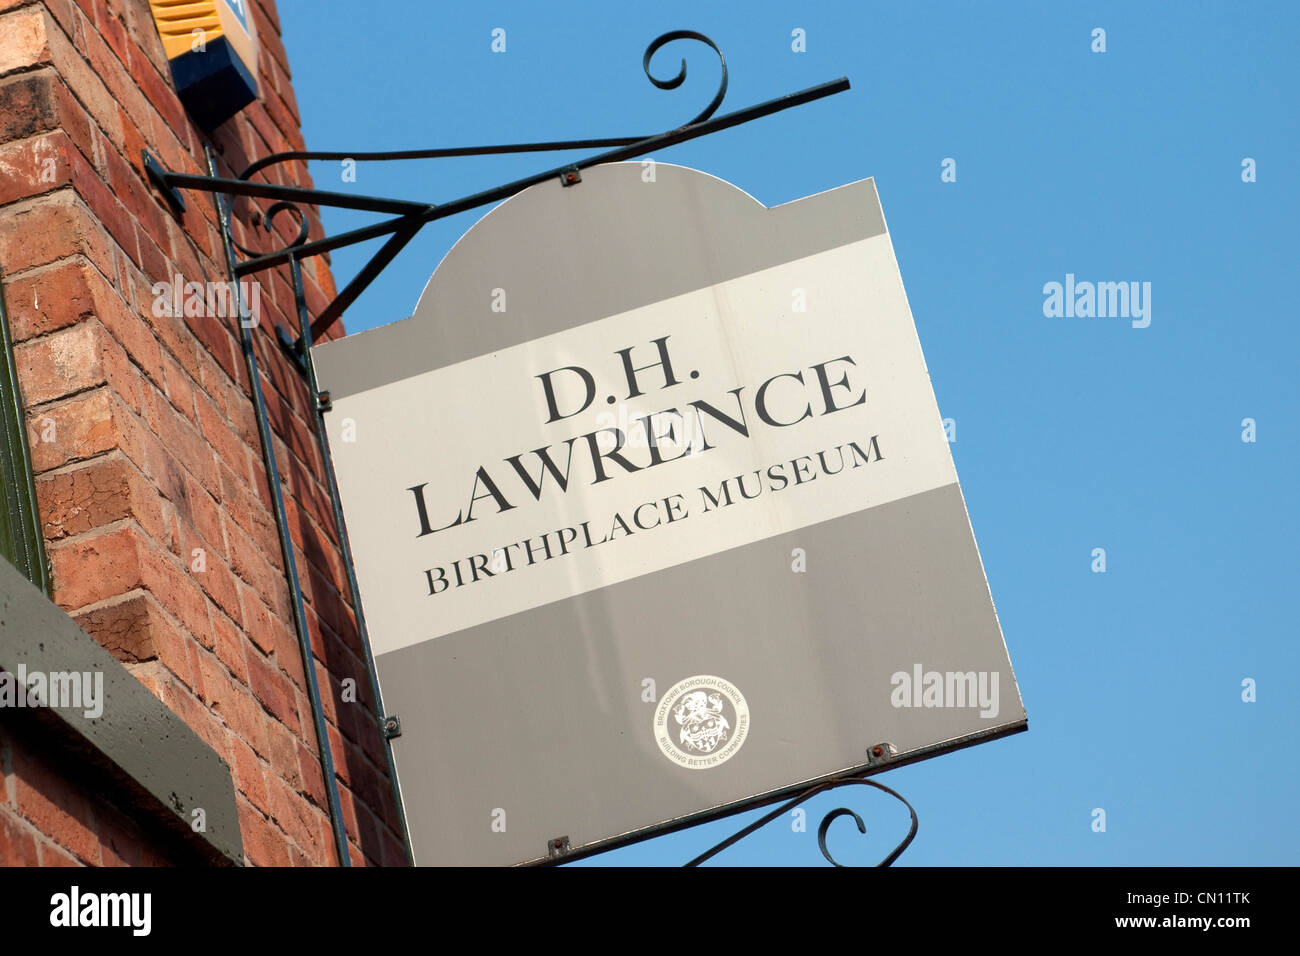 Il D H Lawrence Birthplace Museum in Eastwood, Nottinghamshire Foto Stock